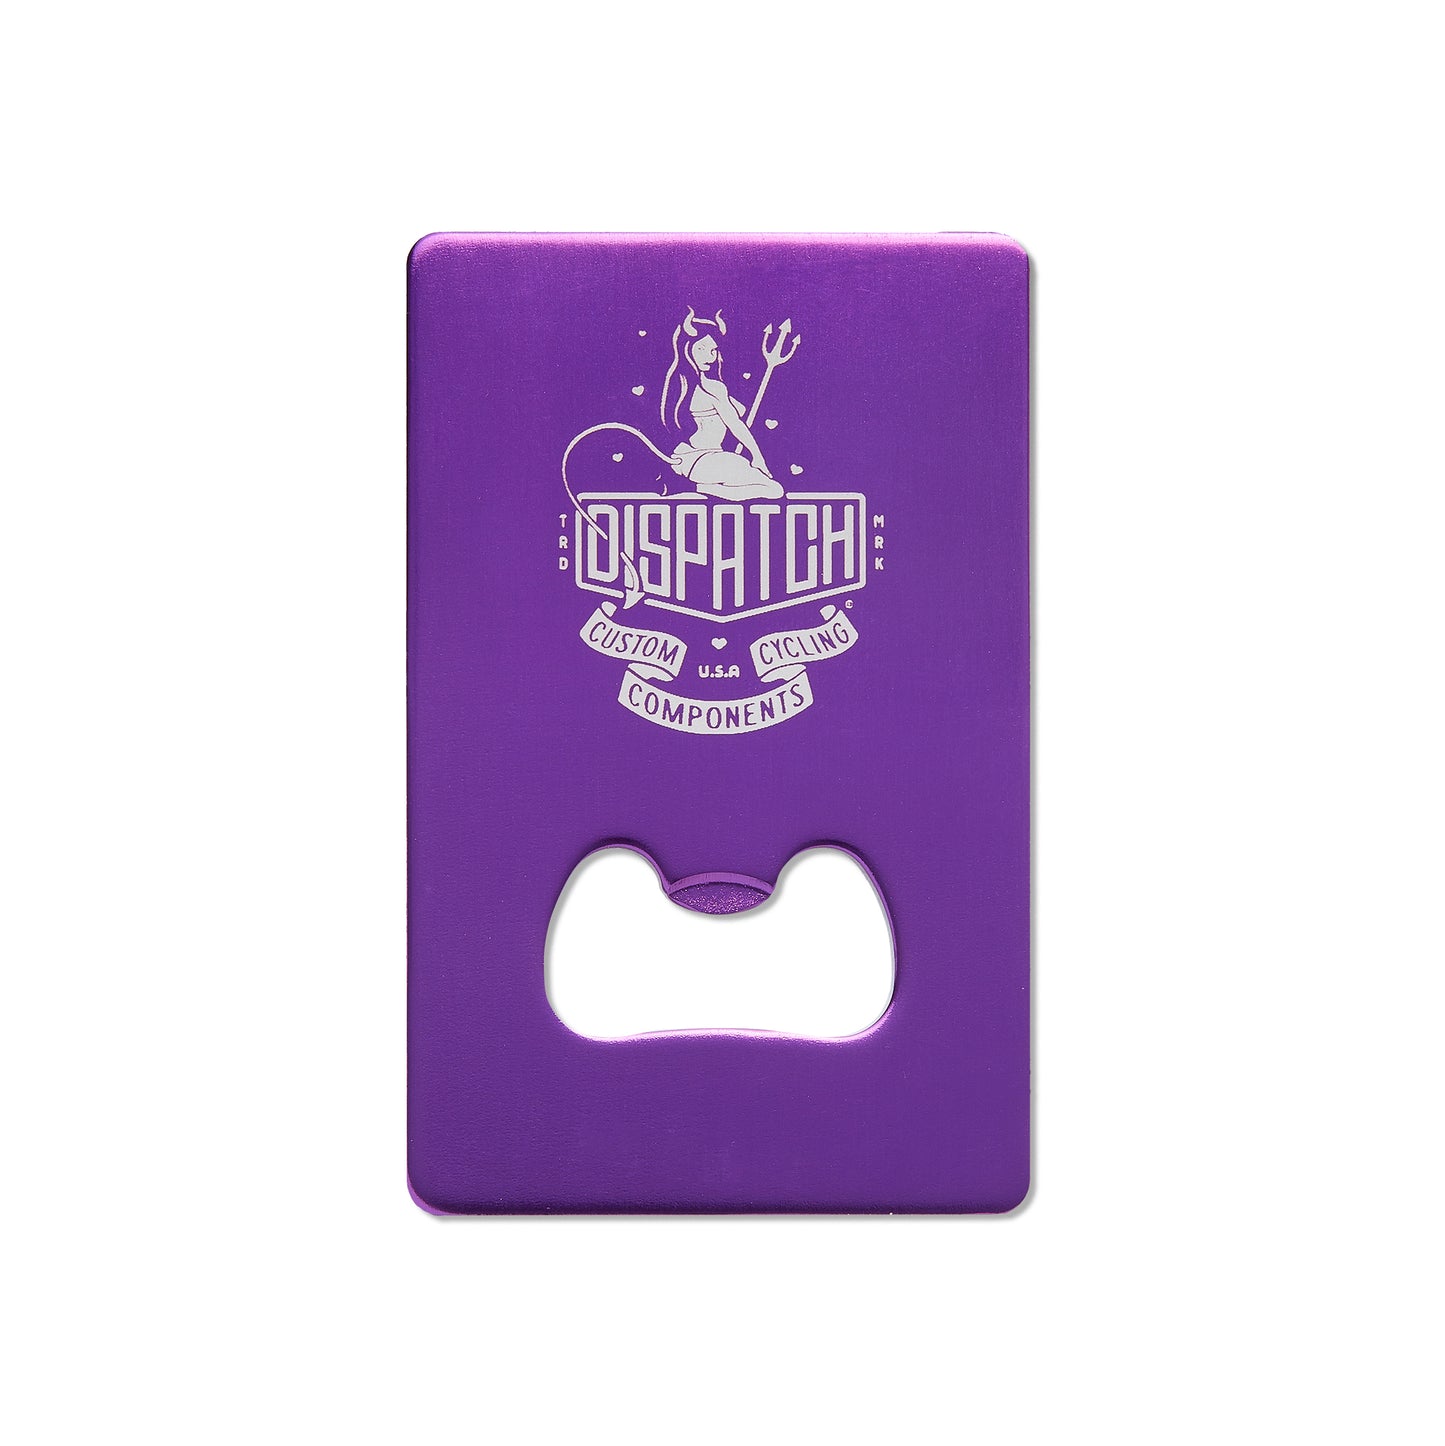 Dispatch Custom Cycling Components Credit Card Bottle Opener